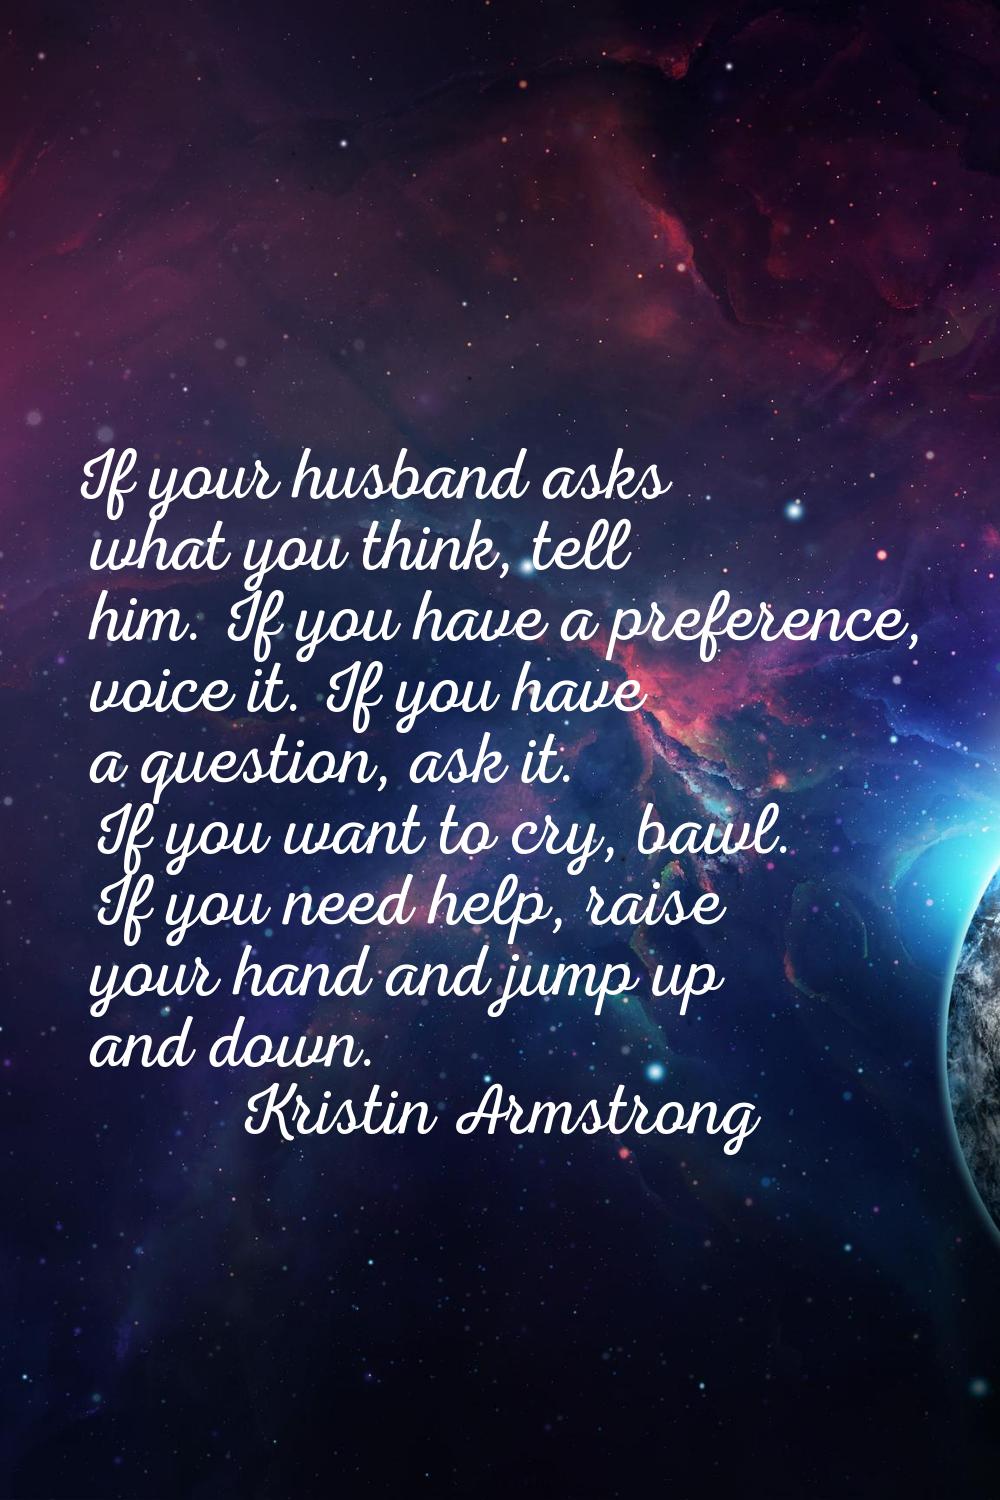 If your husband asks what you think, tell him. If you have a preference, voice it. If you have a qu